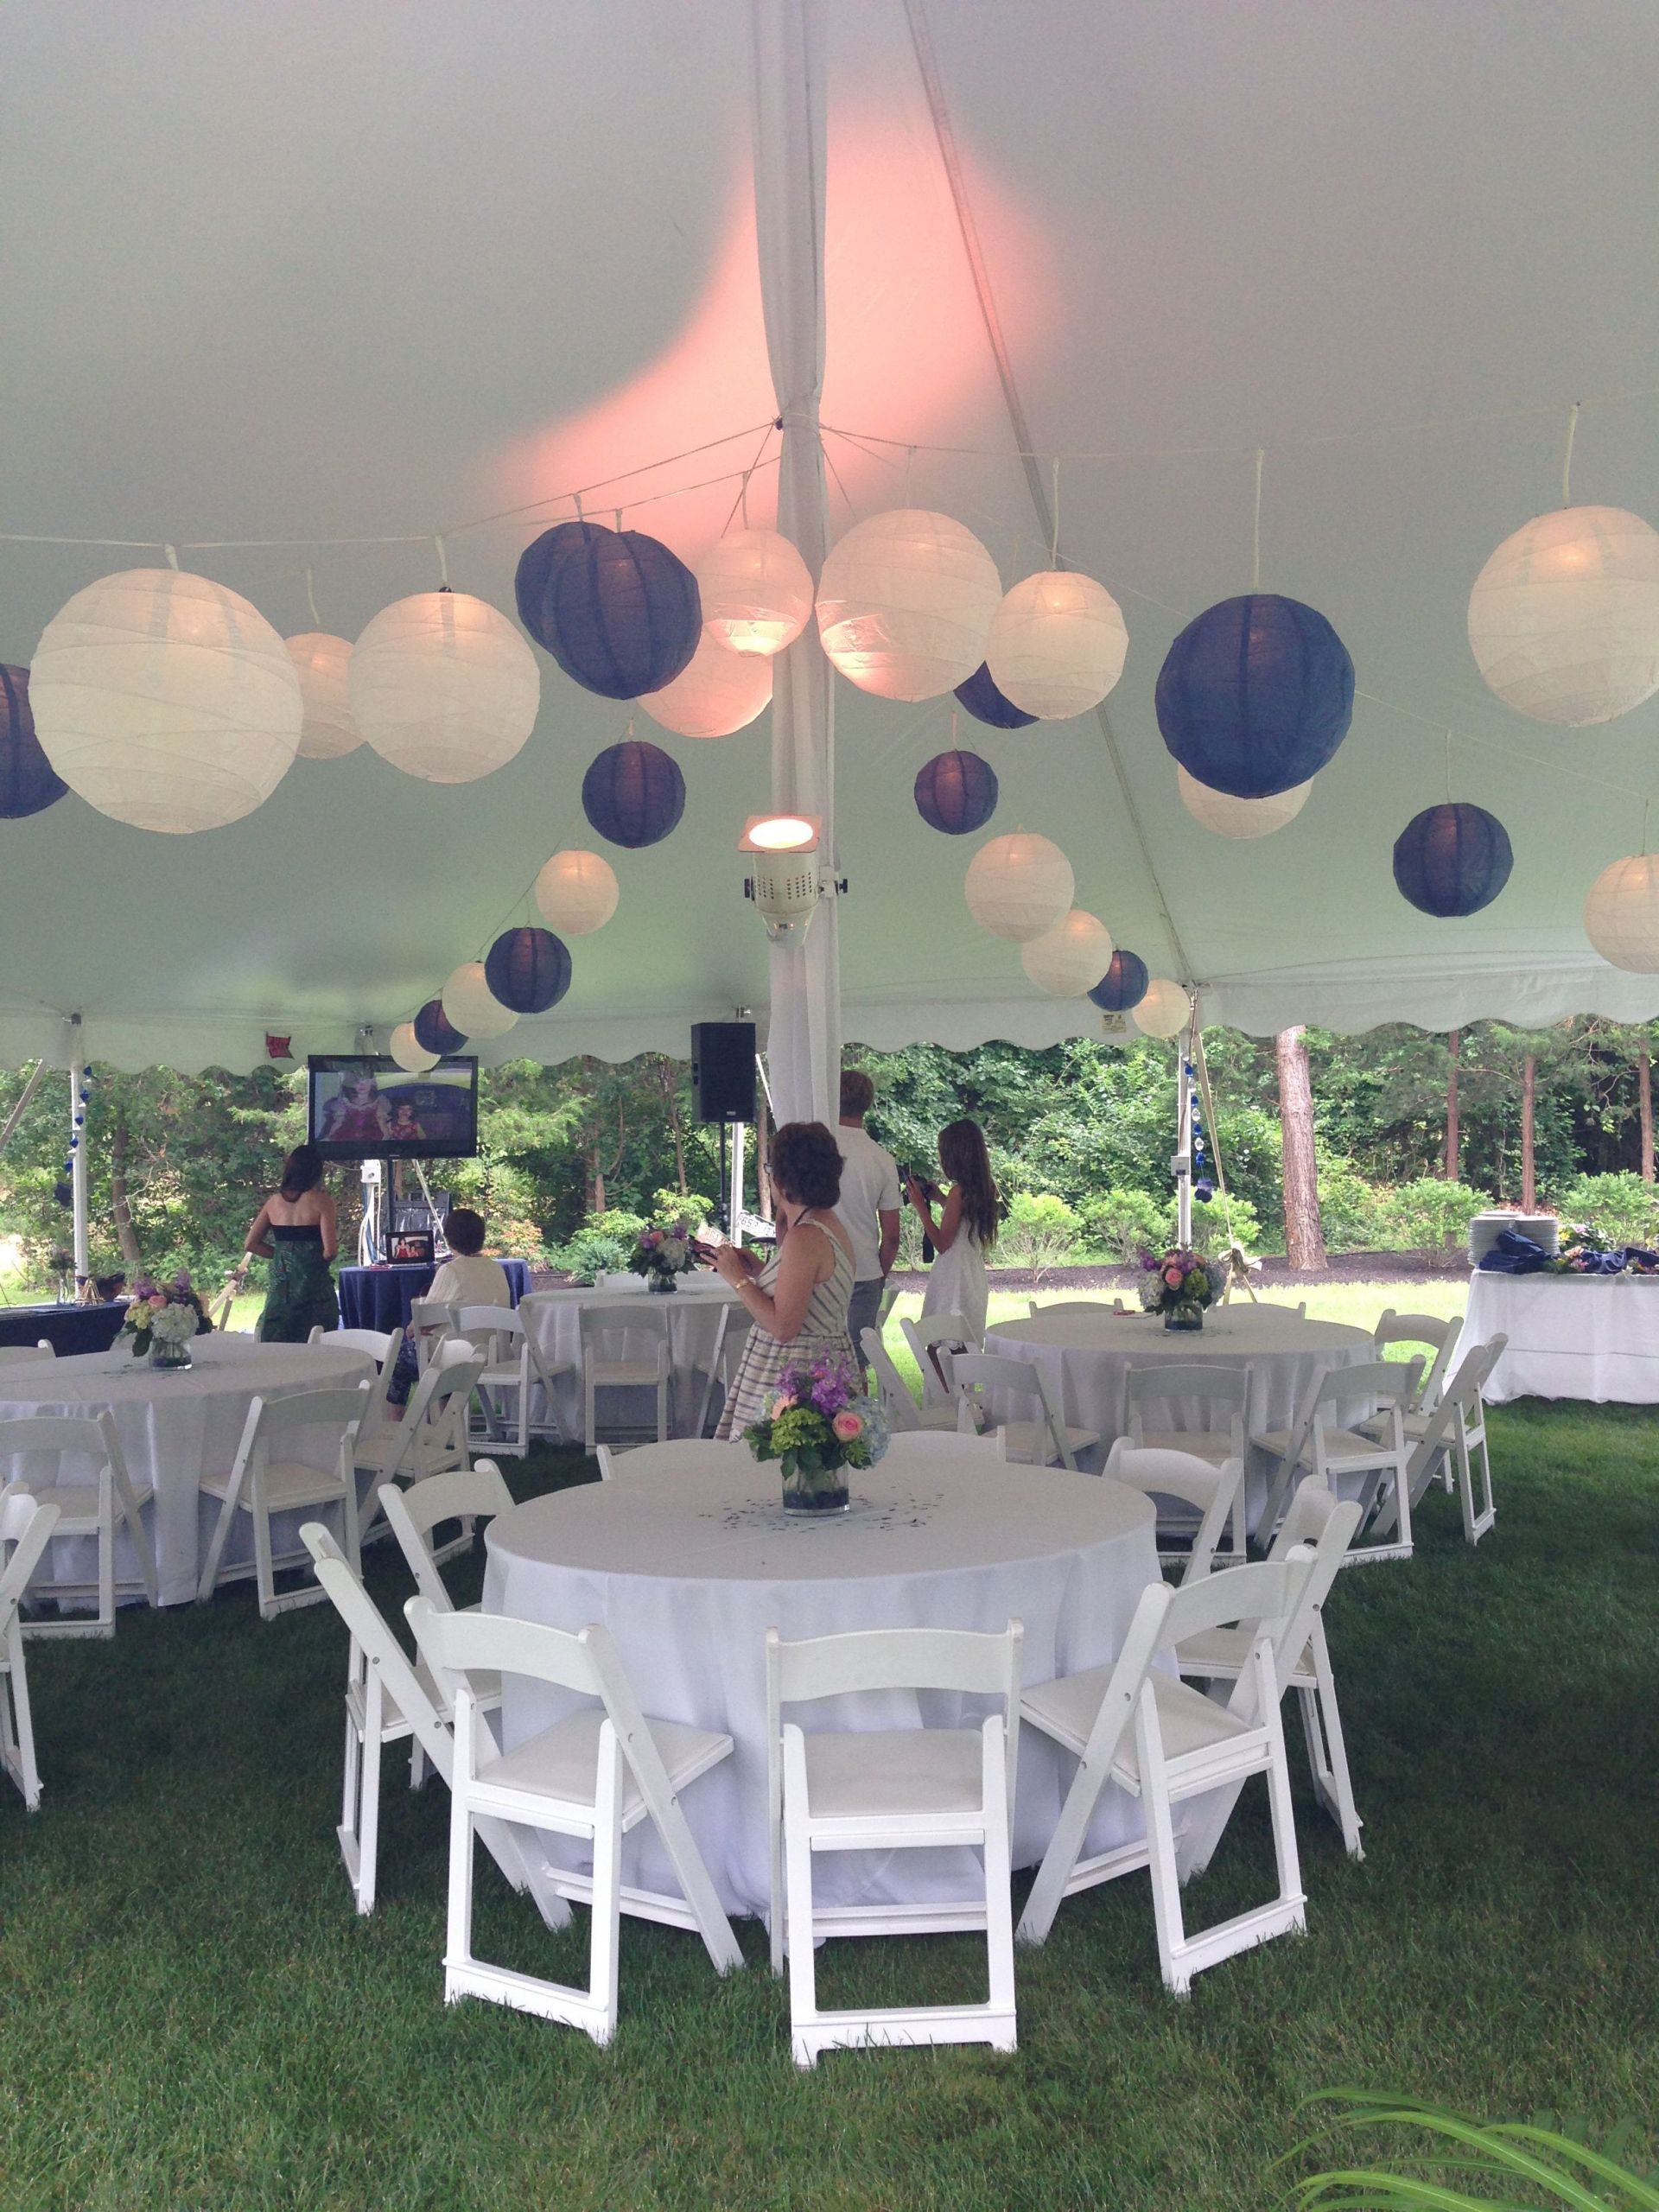 Outdoor High School Graduation Party Ideas
 Tented blue and white graduation party